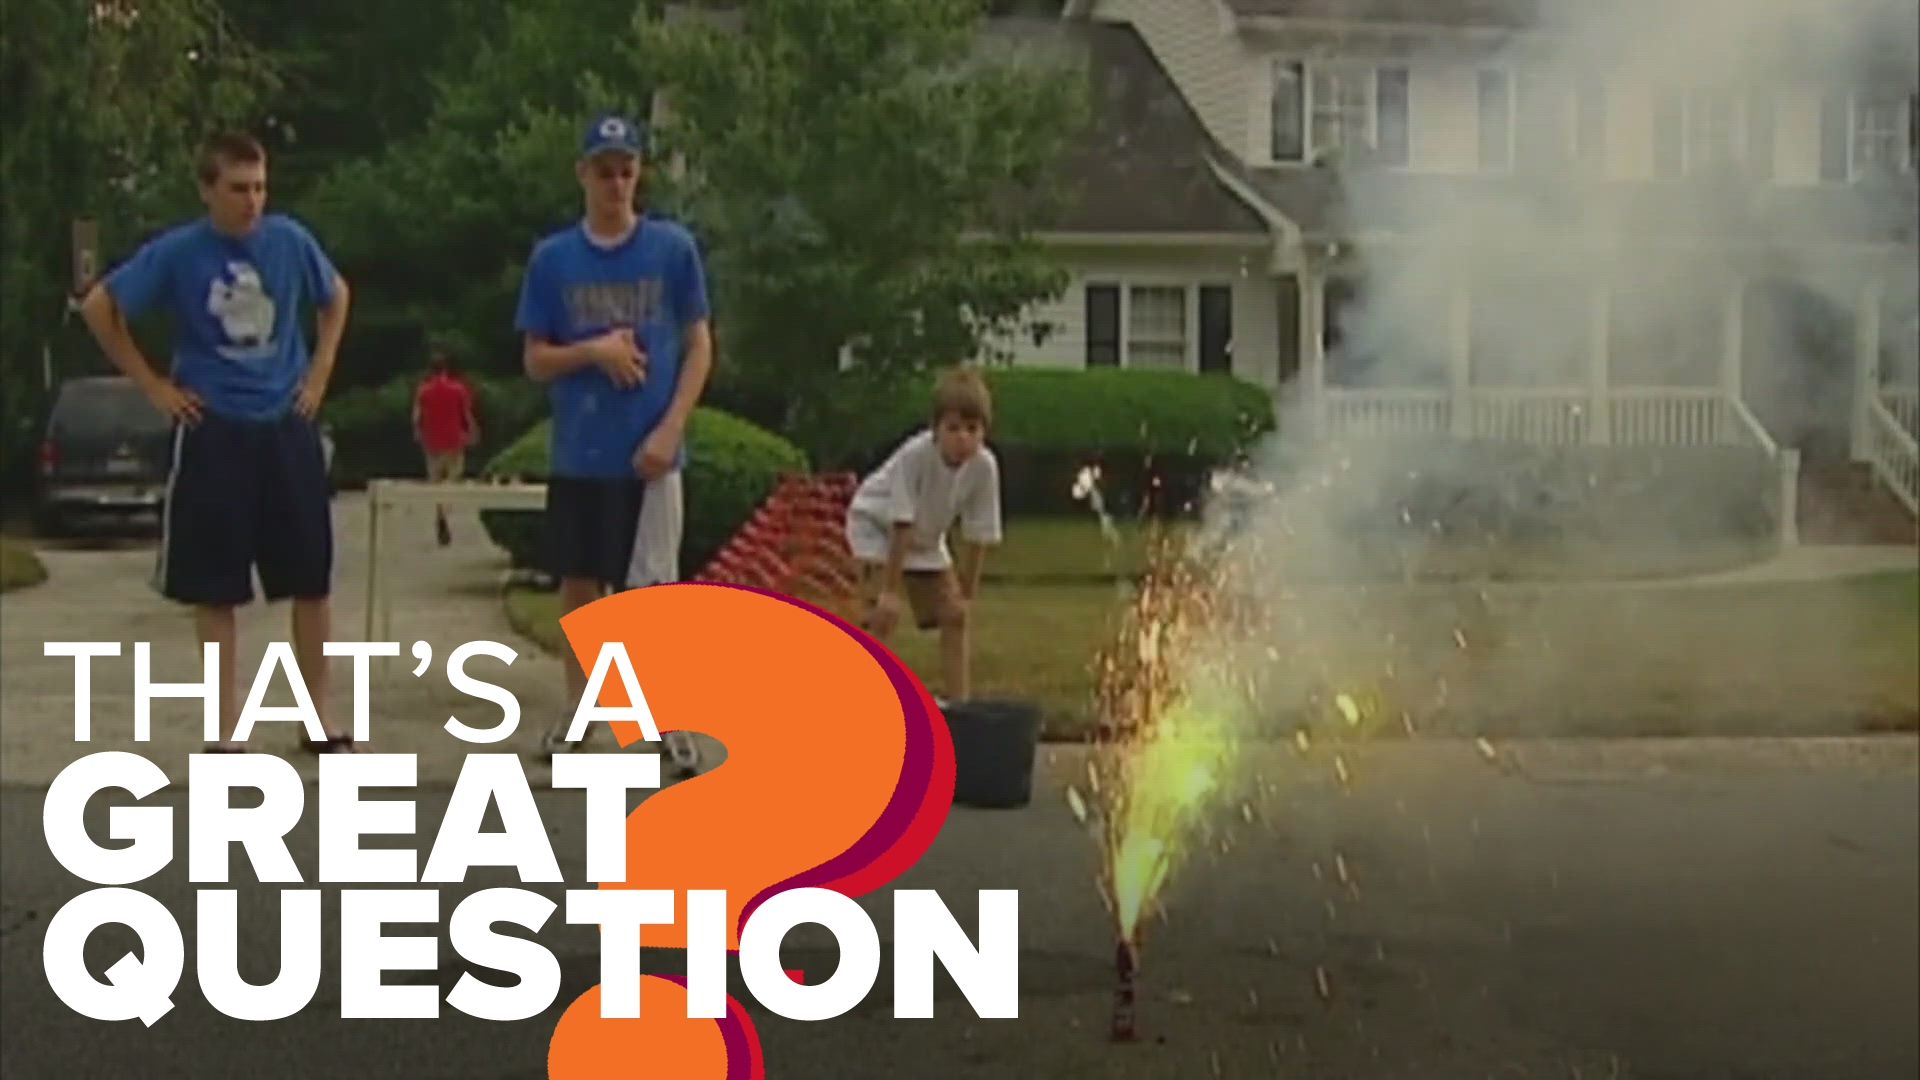 With the 4th of July approaching, people are getting ready to celebrate with fireworks— but how can you help kids & teens stay safe and avoid accidents this year?